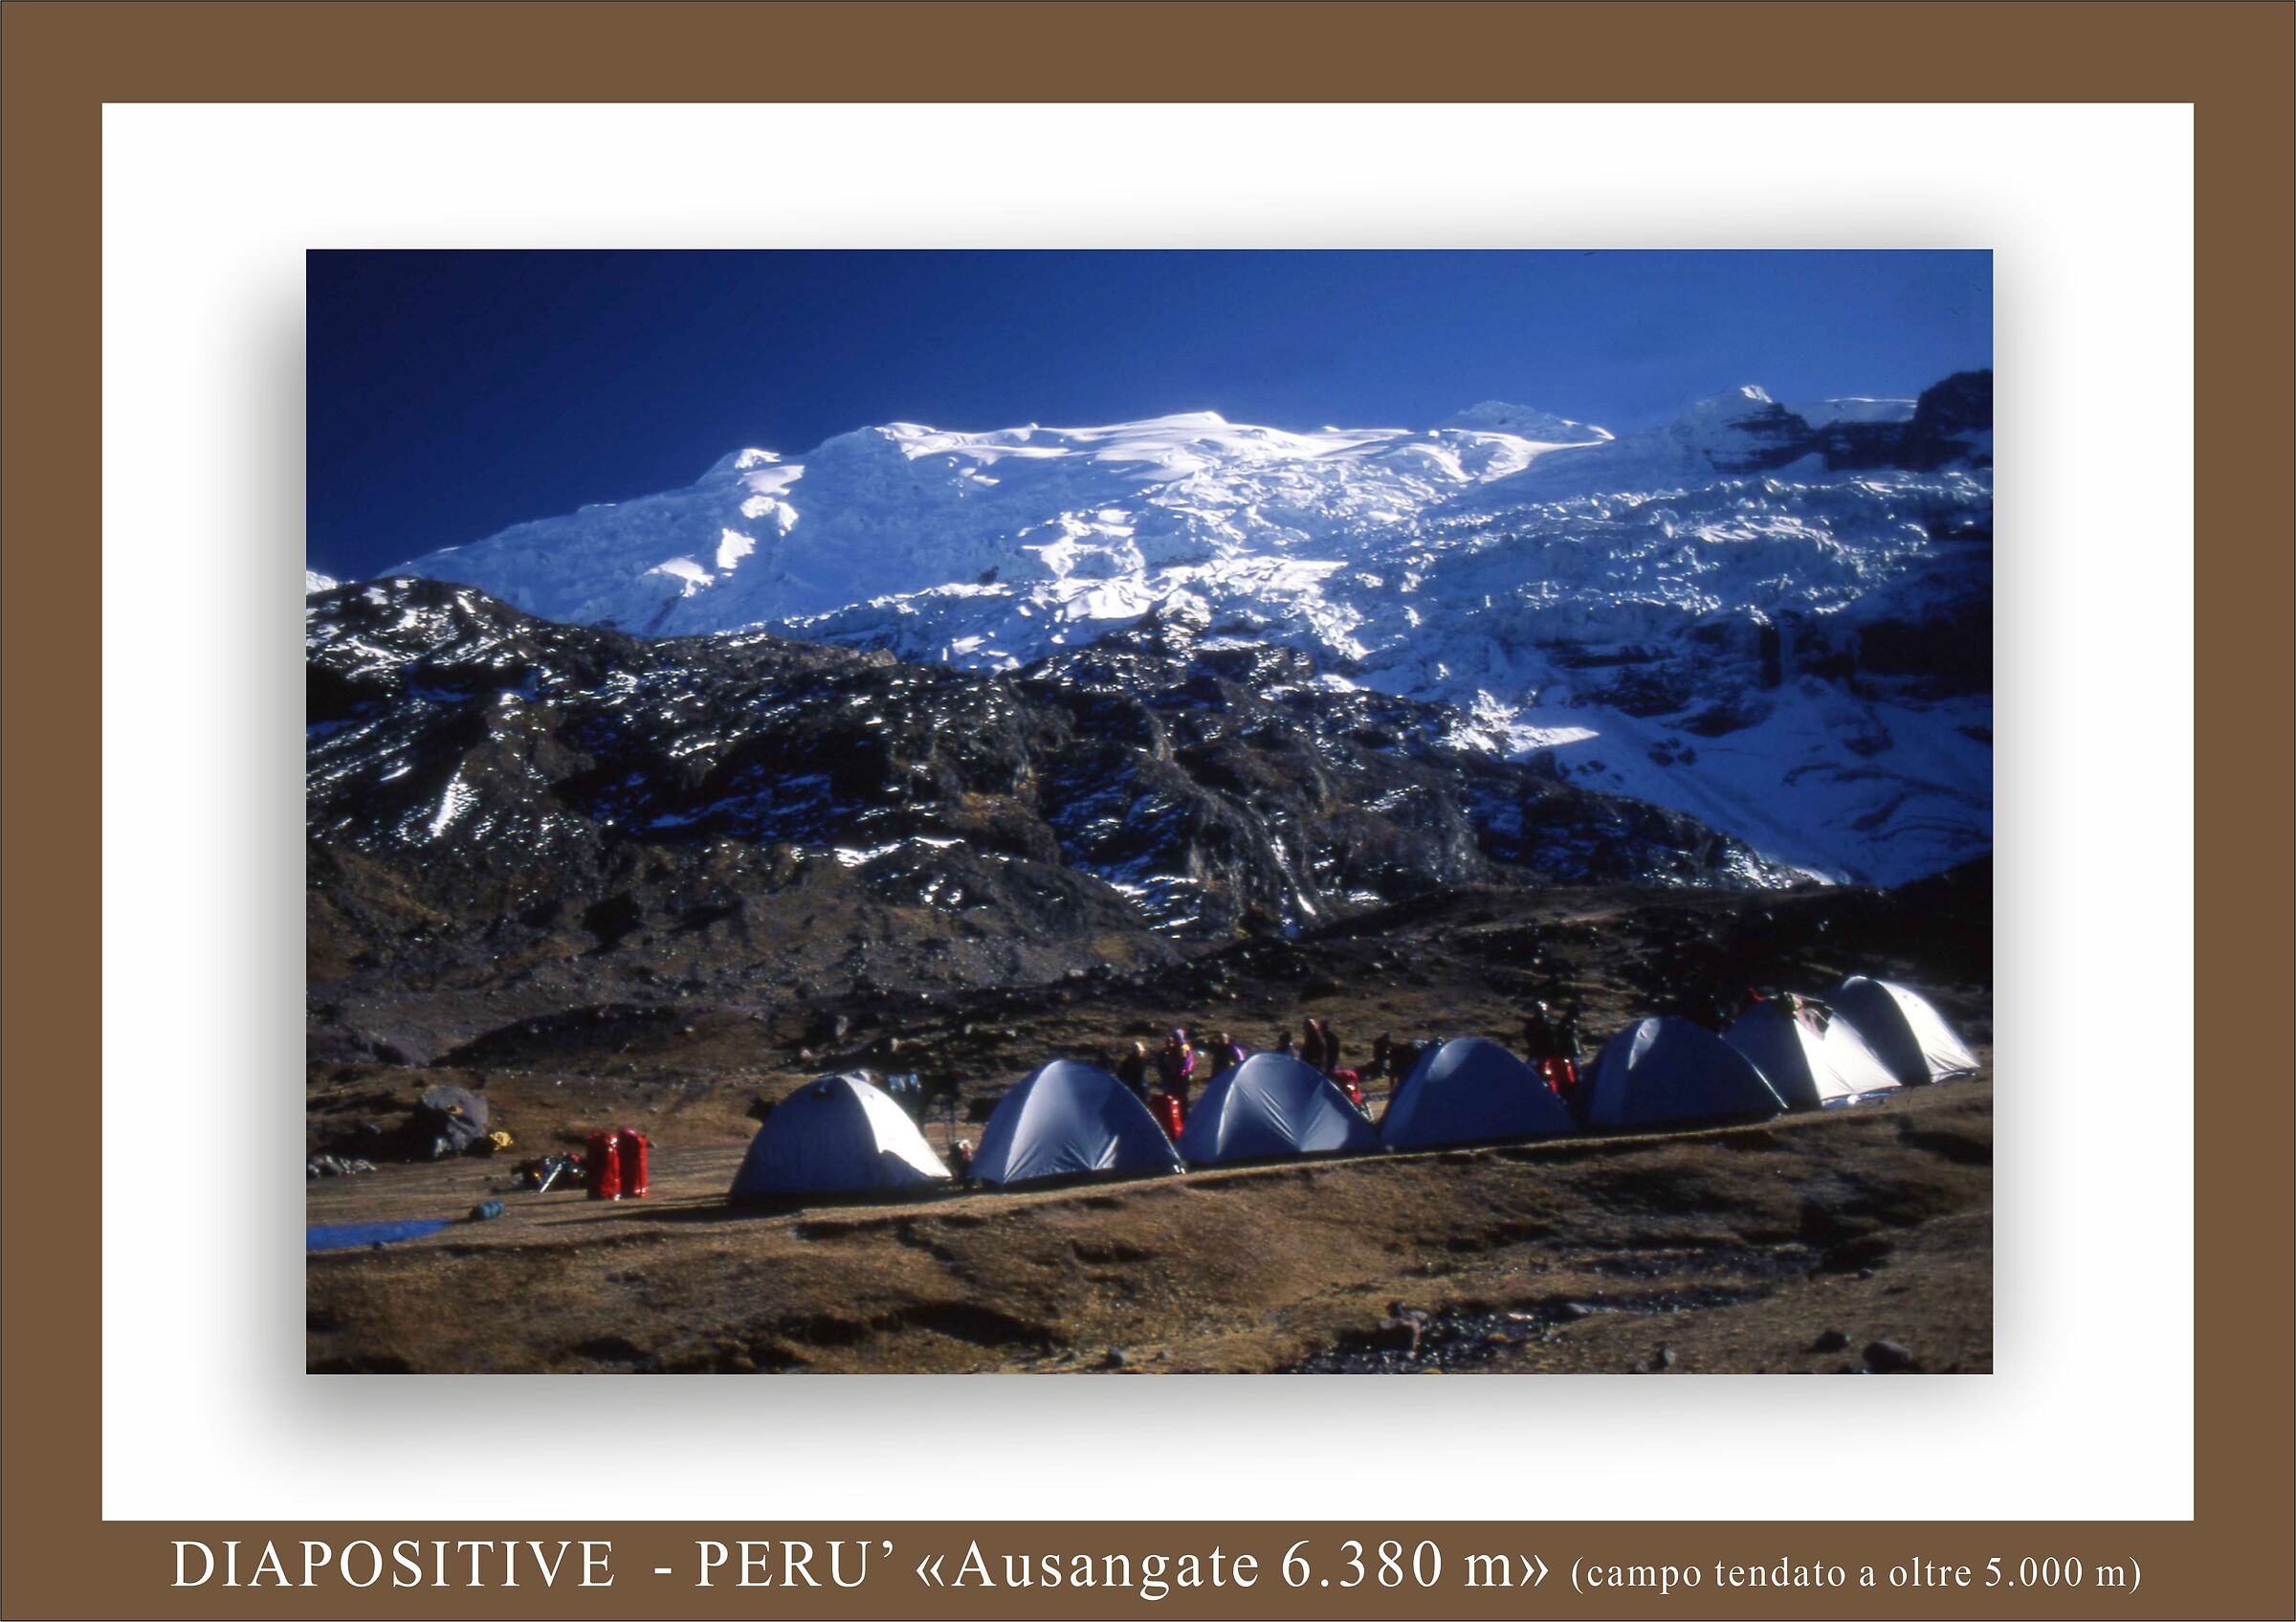 our camp at 5,000 m -Ausangate-...